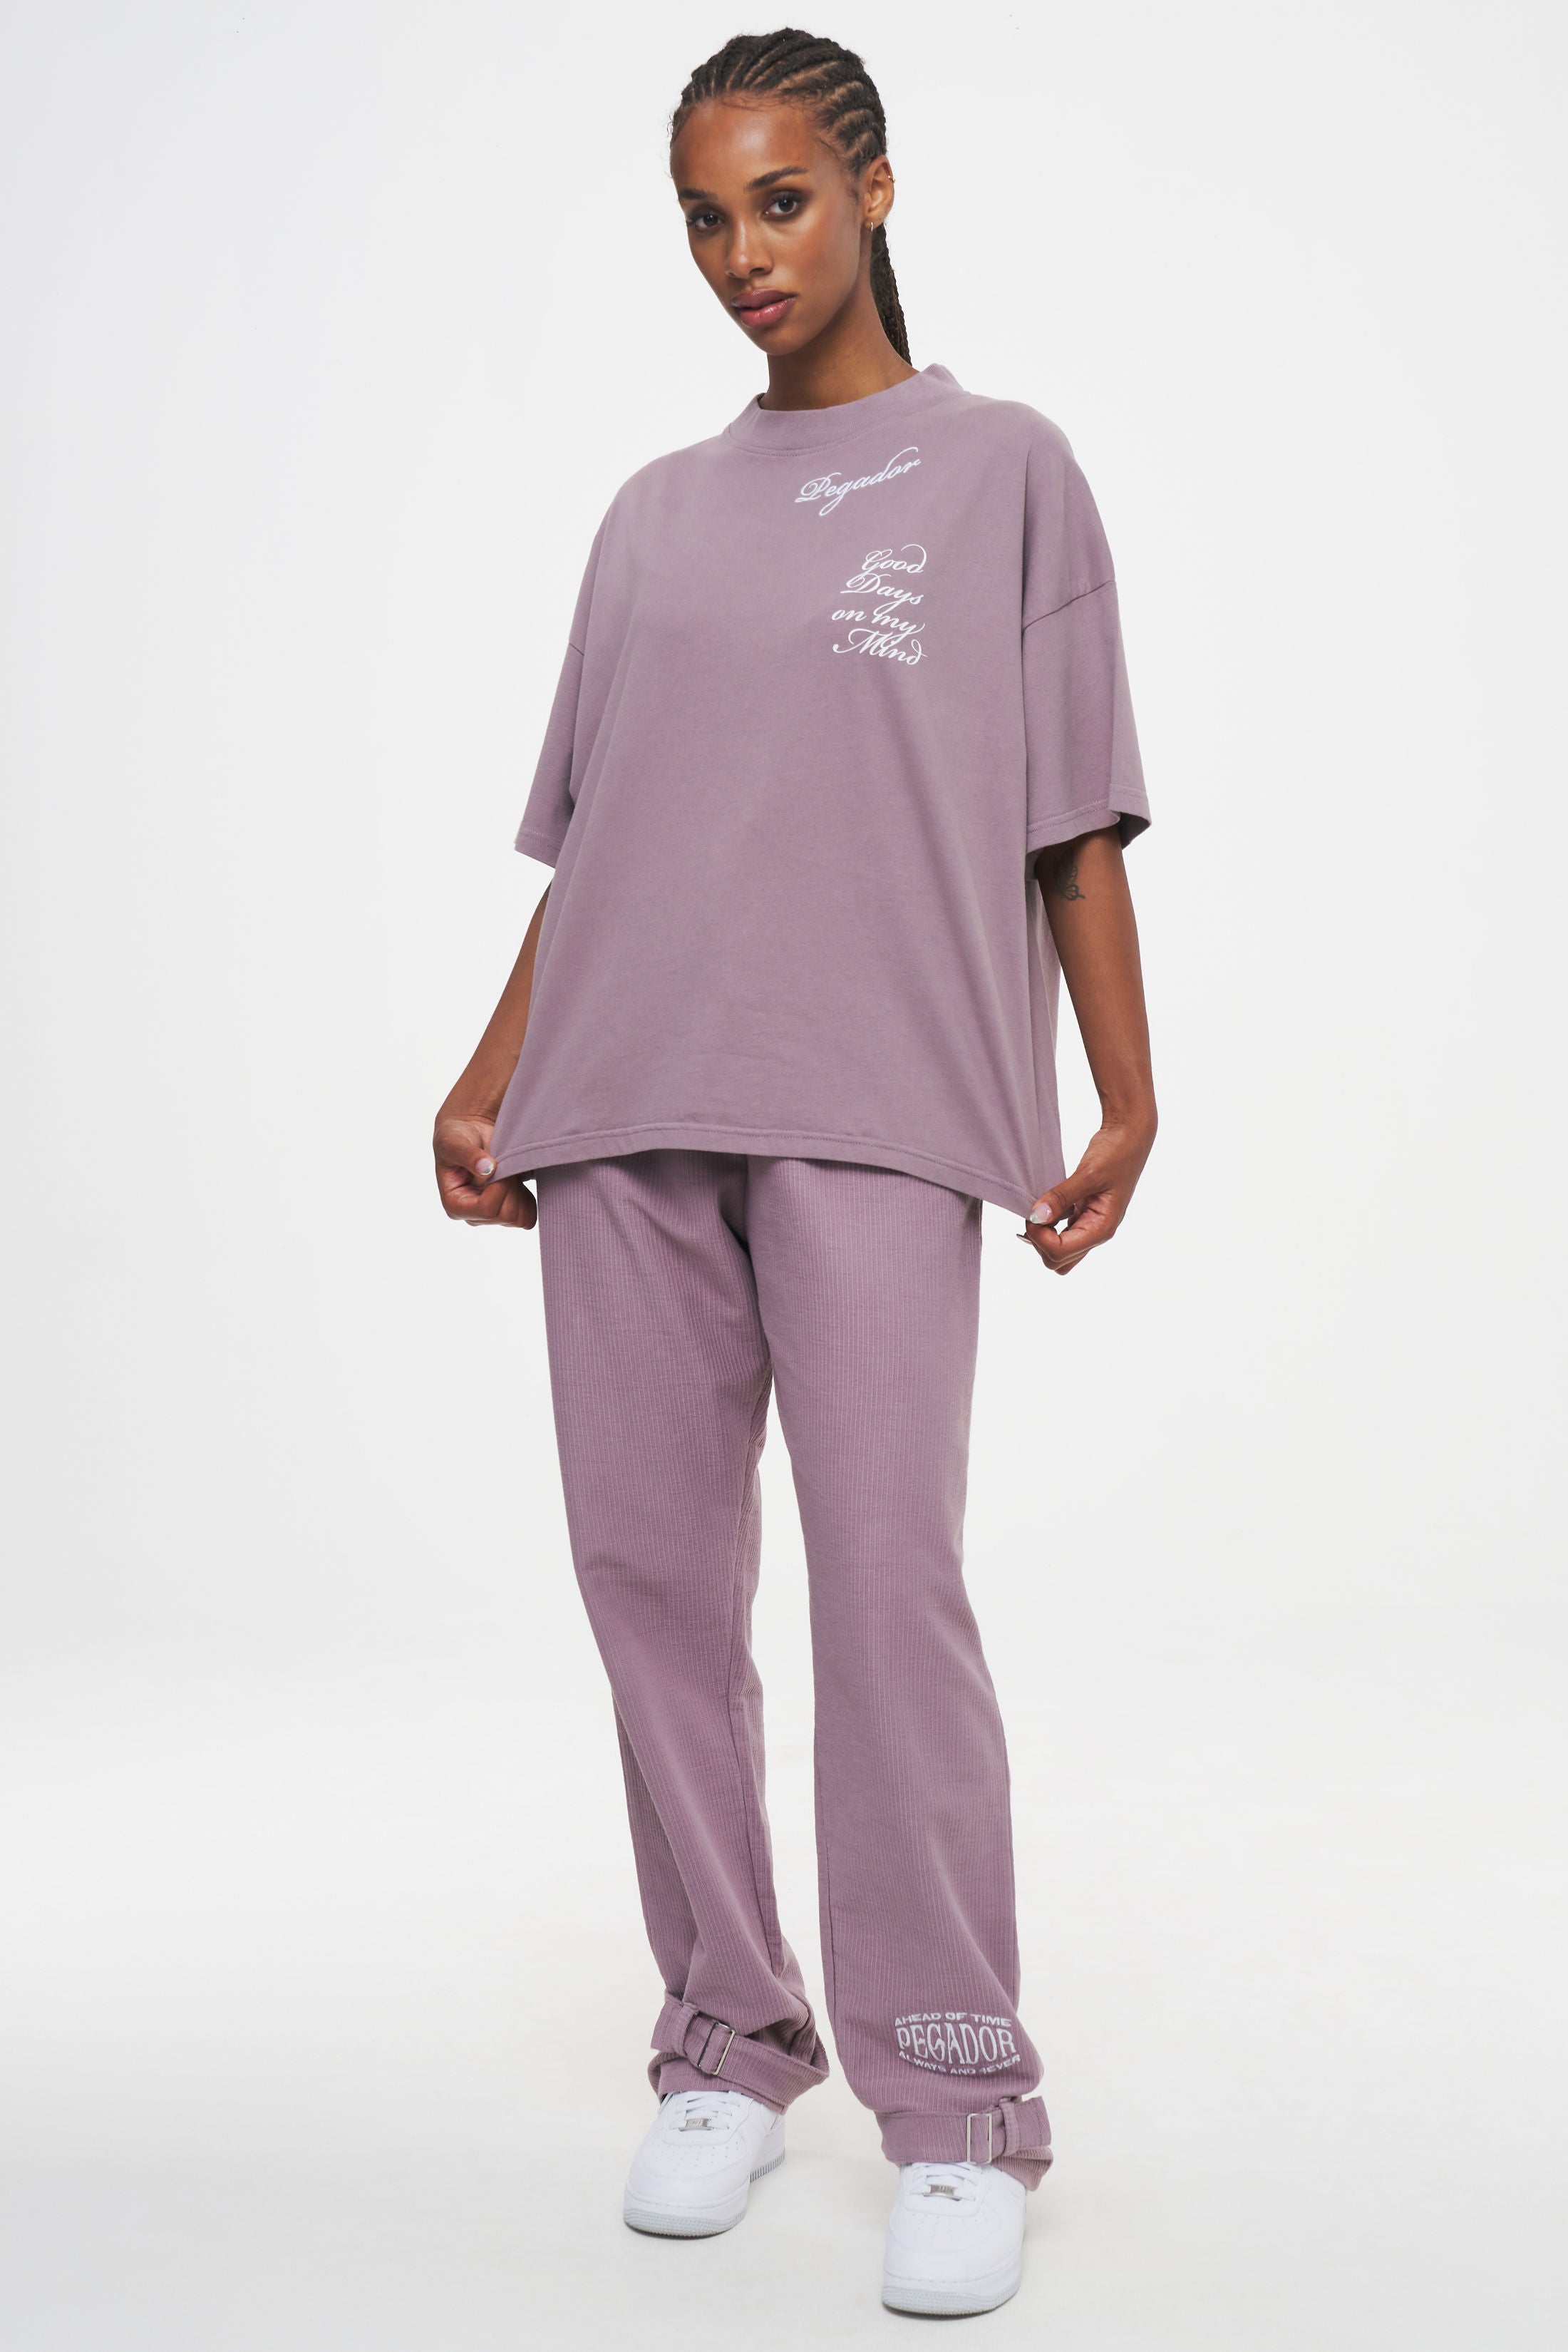 Boras Heavy Oversized Tee Washed Future Violet Tees | Women Ahead of Time Female 